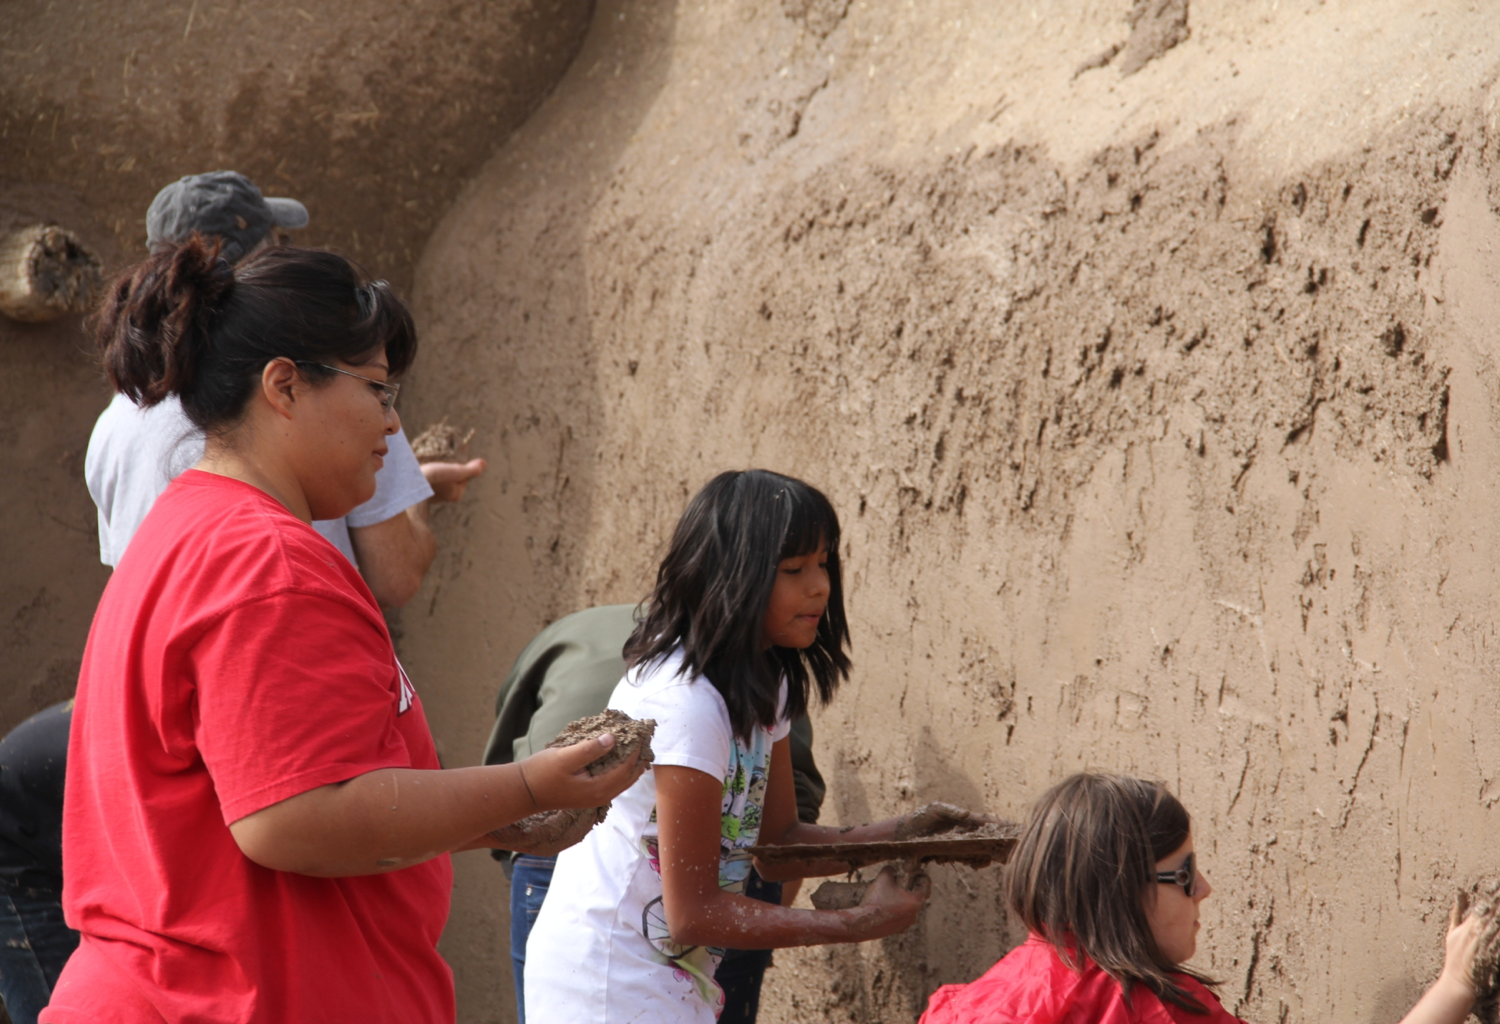 Families plastering a wall with mud